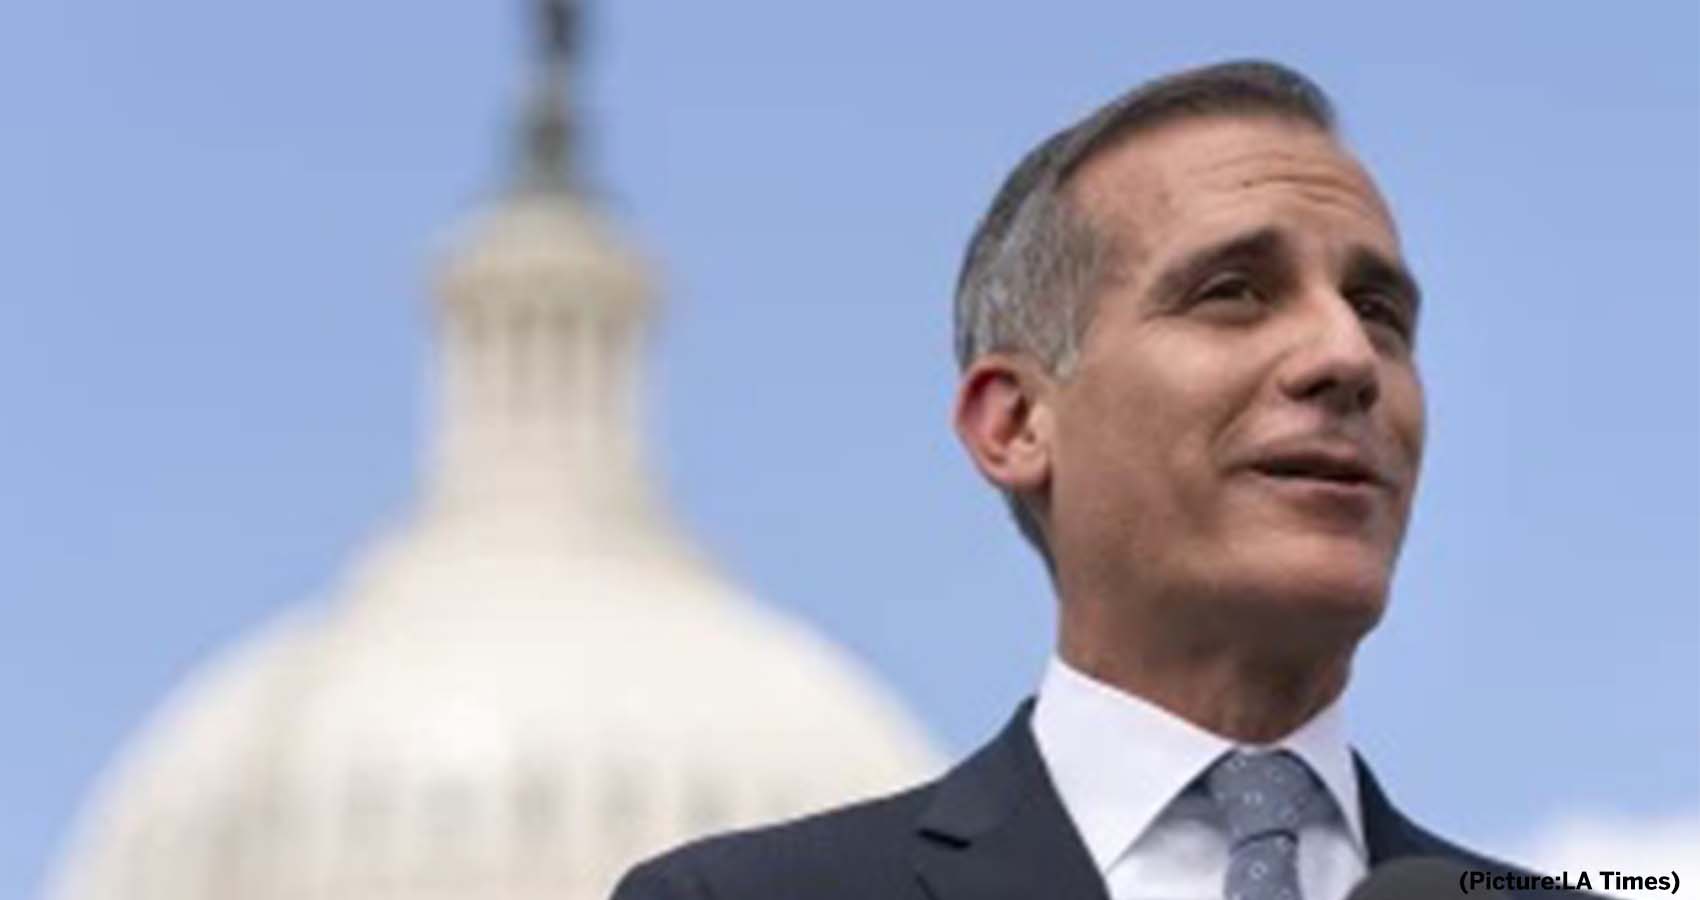 Eric Garcetti Confirmed BY Senate Committee To Be  U.S. Ambassador To India